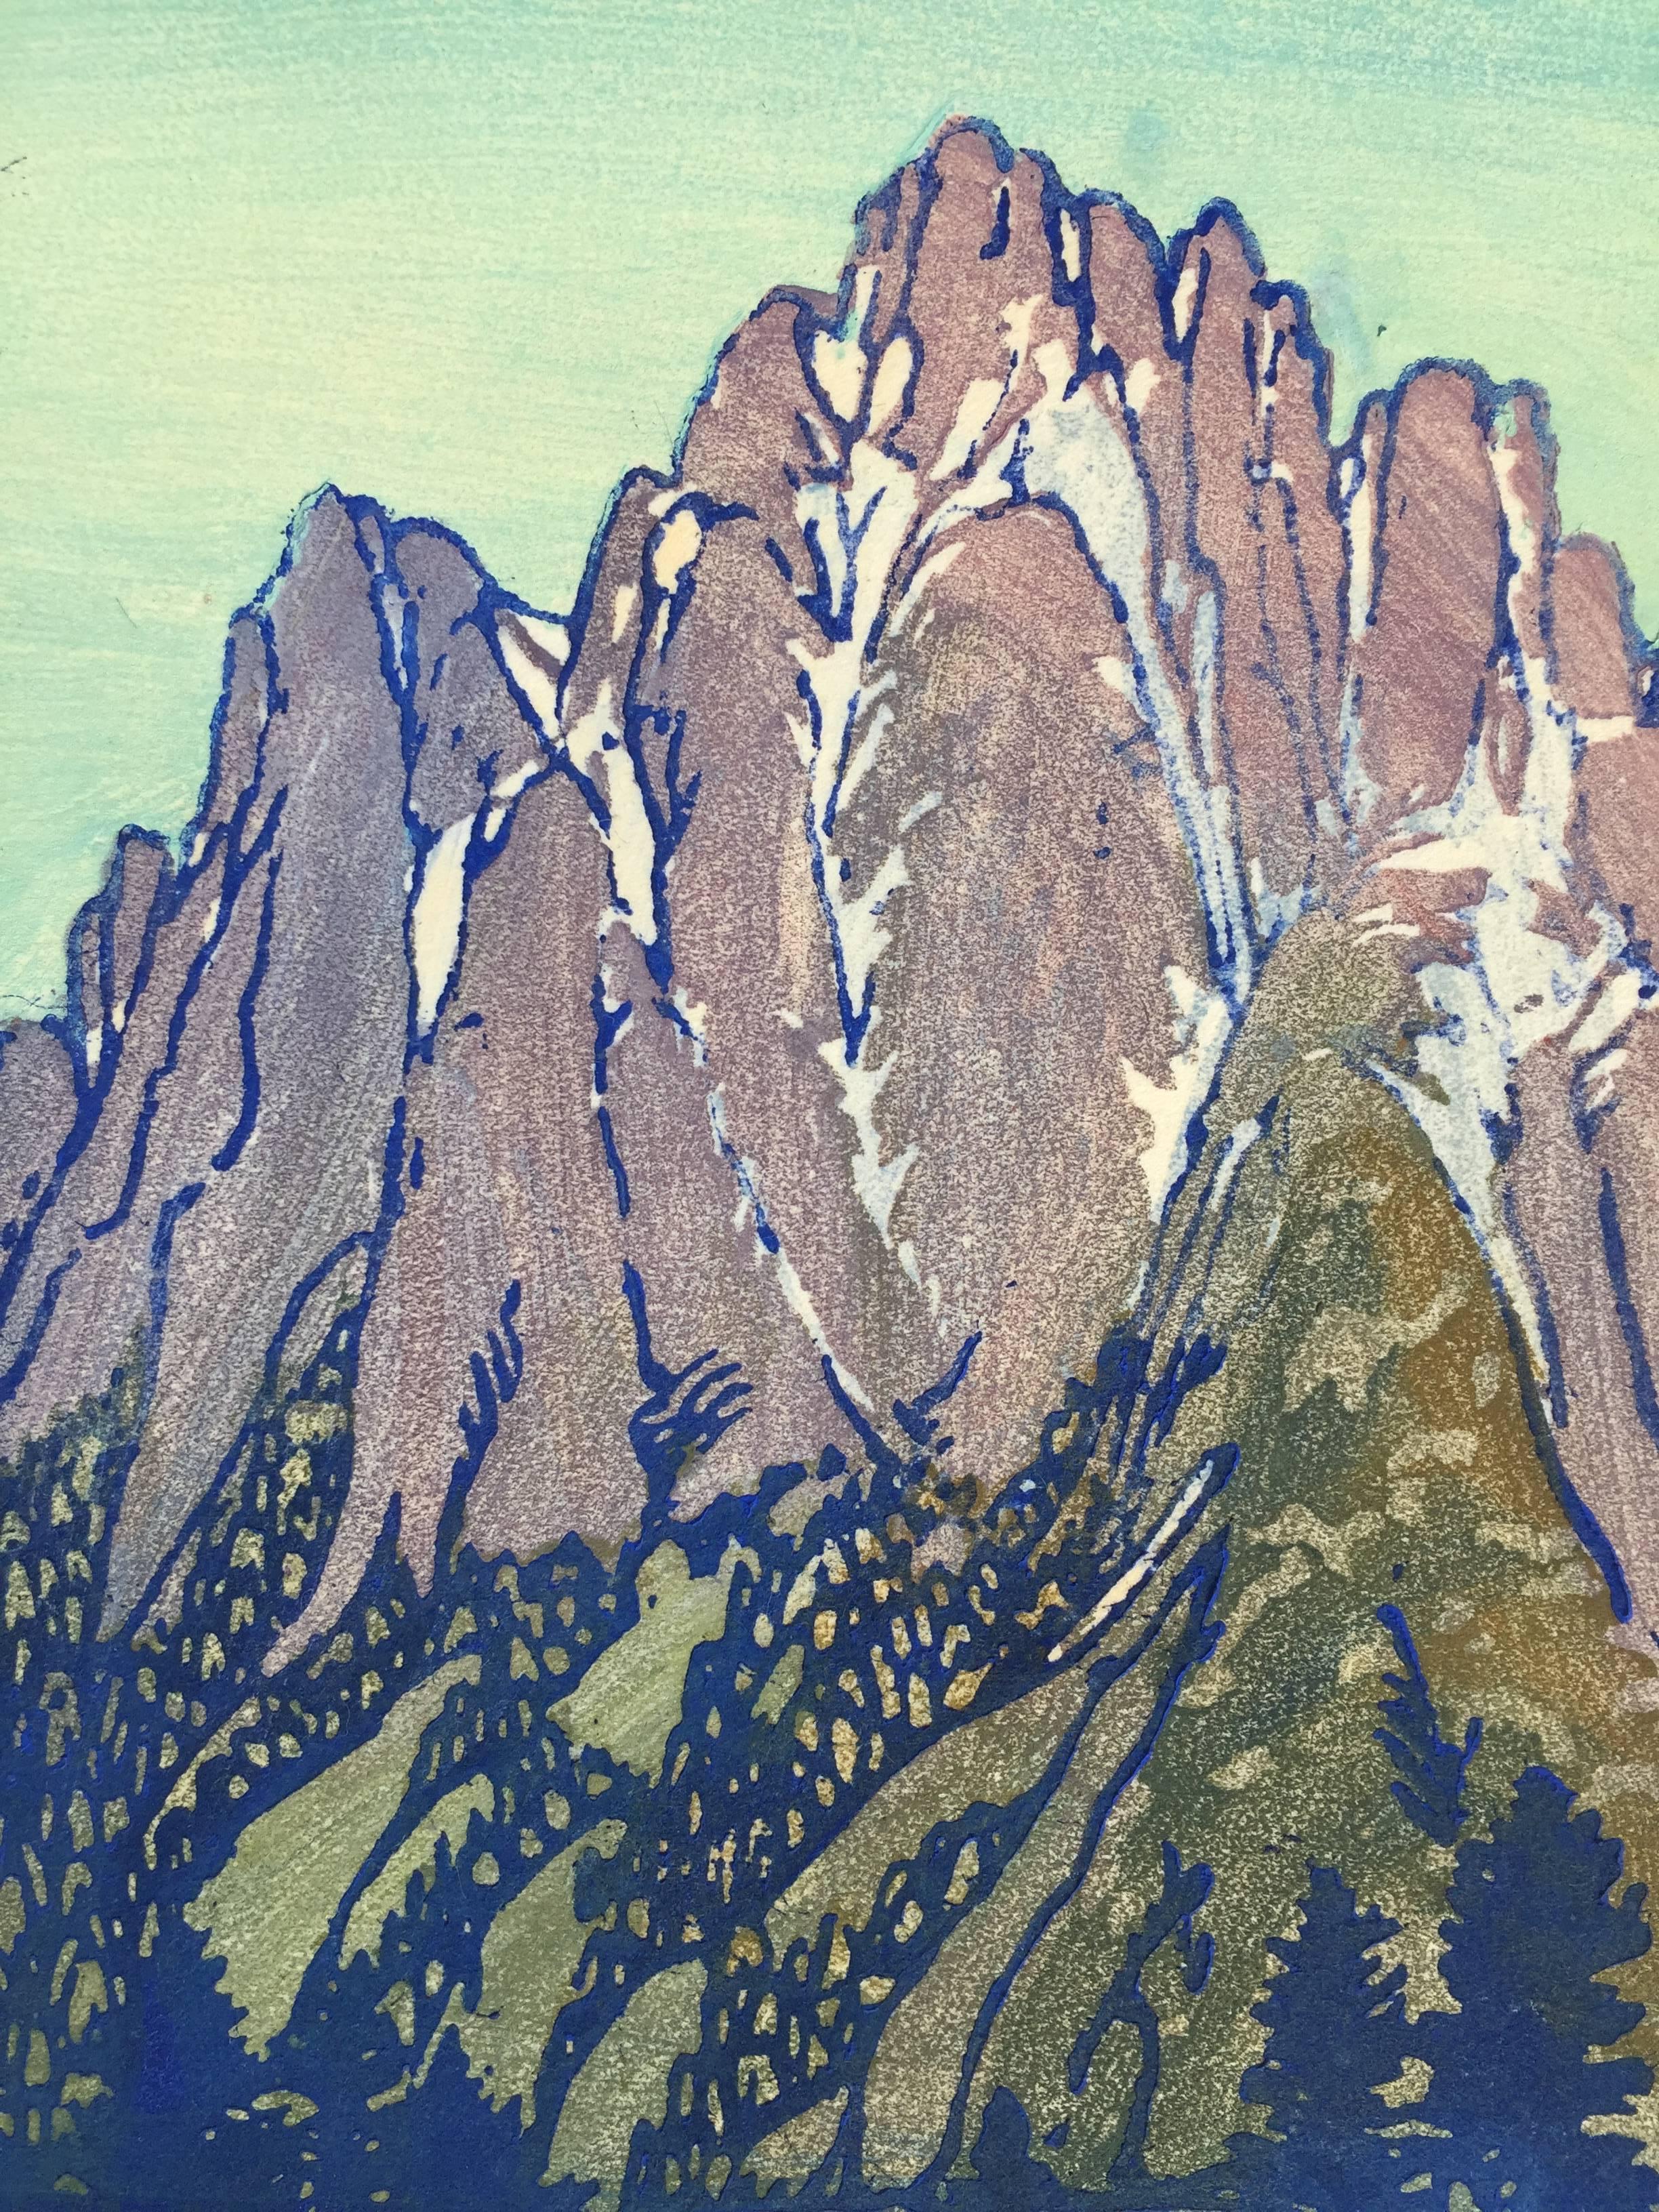 FRANCES H. GEARHART (1869-1958)

LONELY SIERRA, ca. 1929  Color block print. 9 1/8 x 6 1/4 inches. Sheet 14 1/2 x 9 inches.
Signed in pencil. SIGNED IMPRESSIONS OF THIS PRINT ARE RARE. It is usually found unsigned. Untitled. Very good, fresh